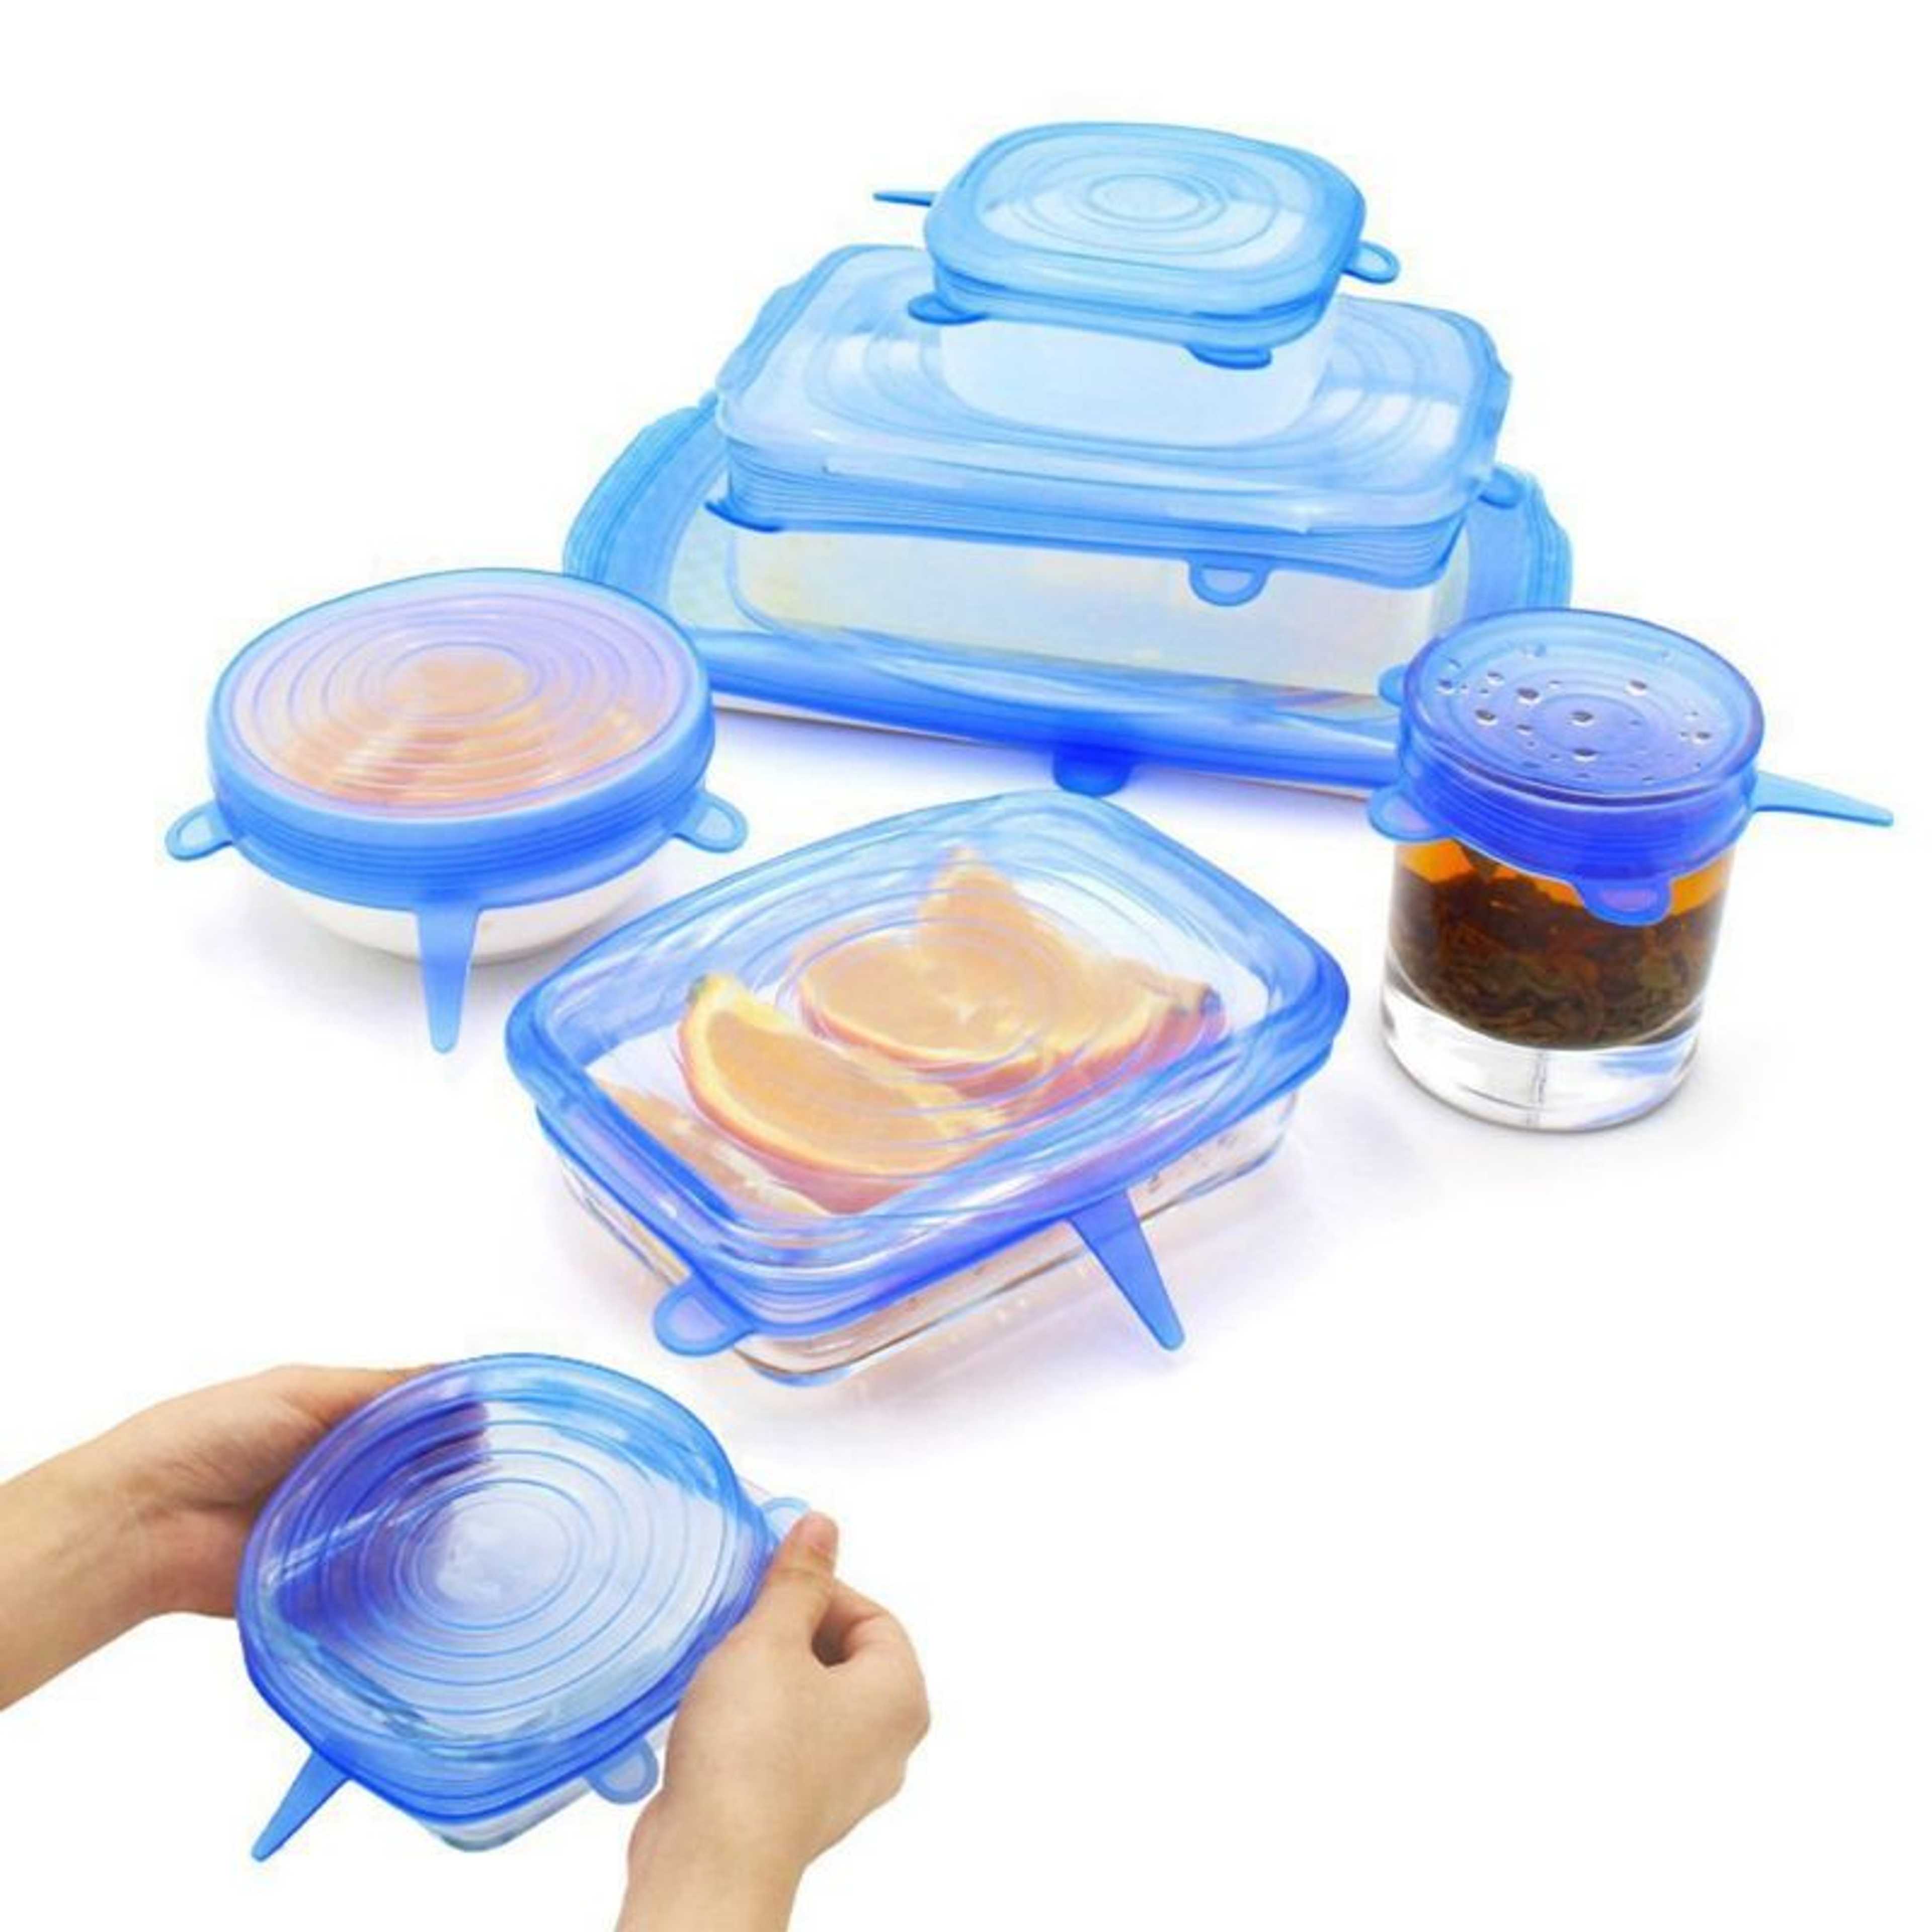 6 Pieces/Set Reusable Silicone Food Seal Wrap Square Shape Silicone Stretch Lids Keeping Food Fresh Cover Bowl Pot Lid